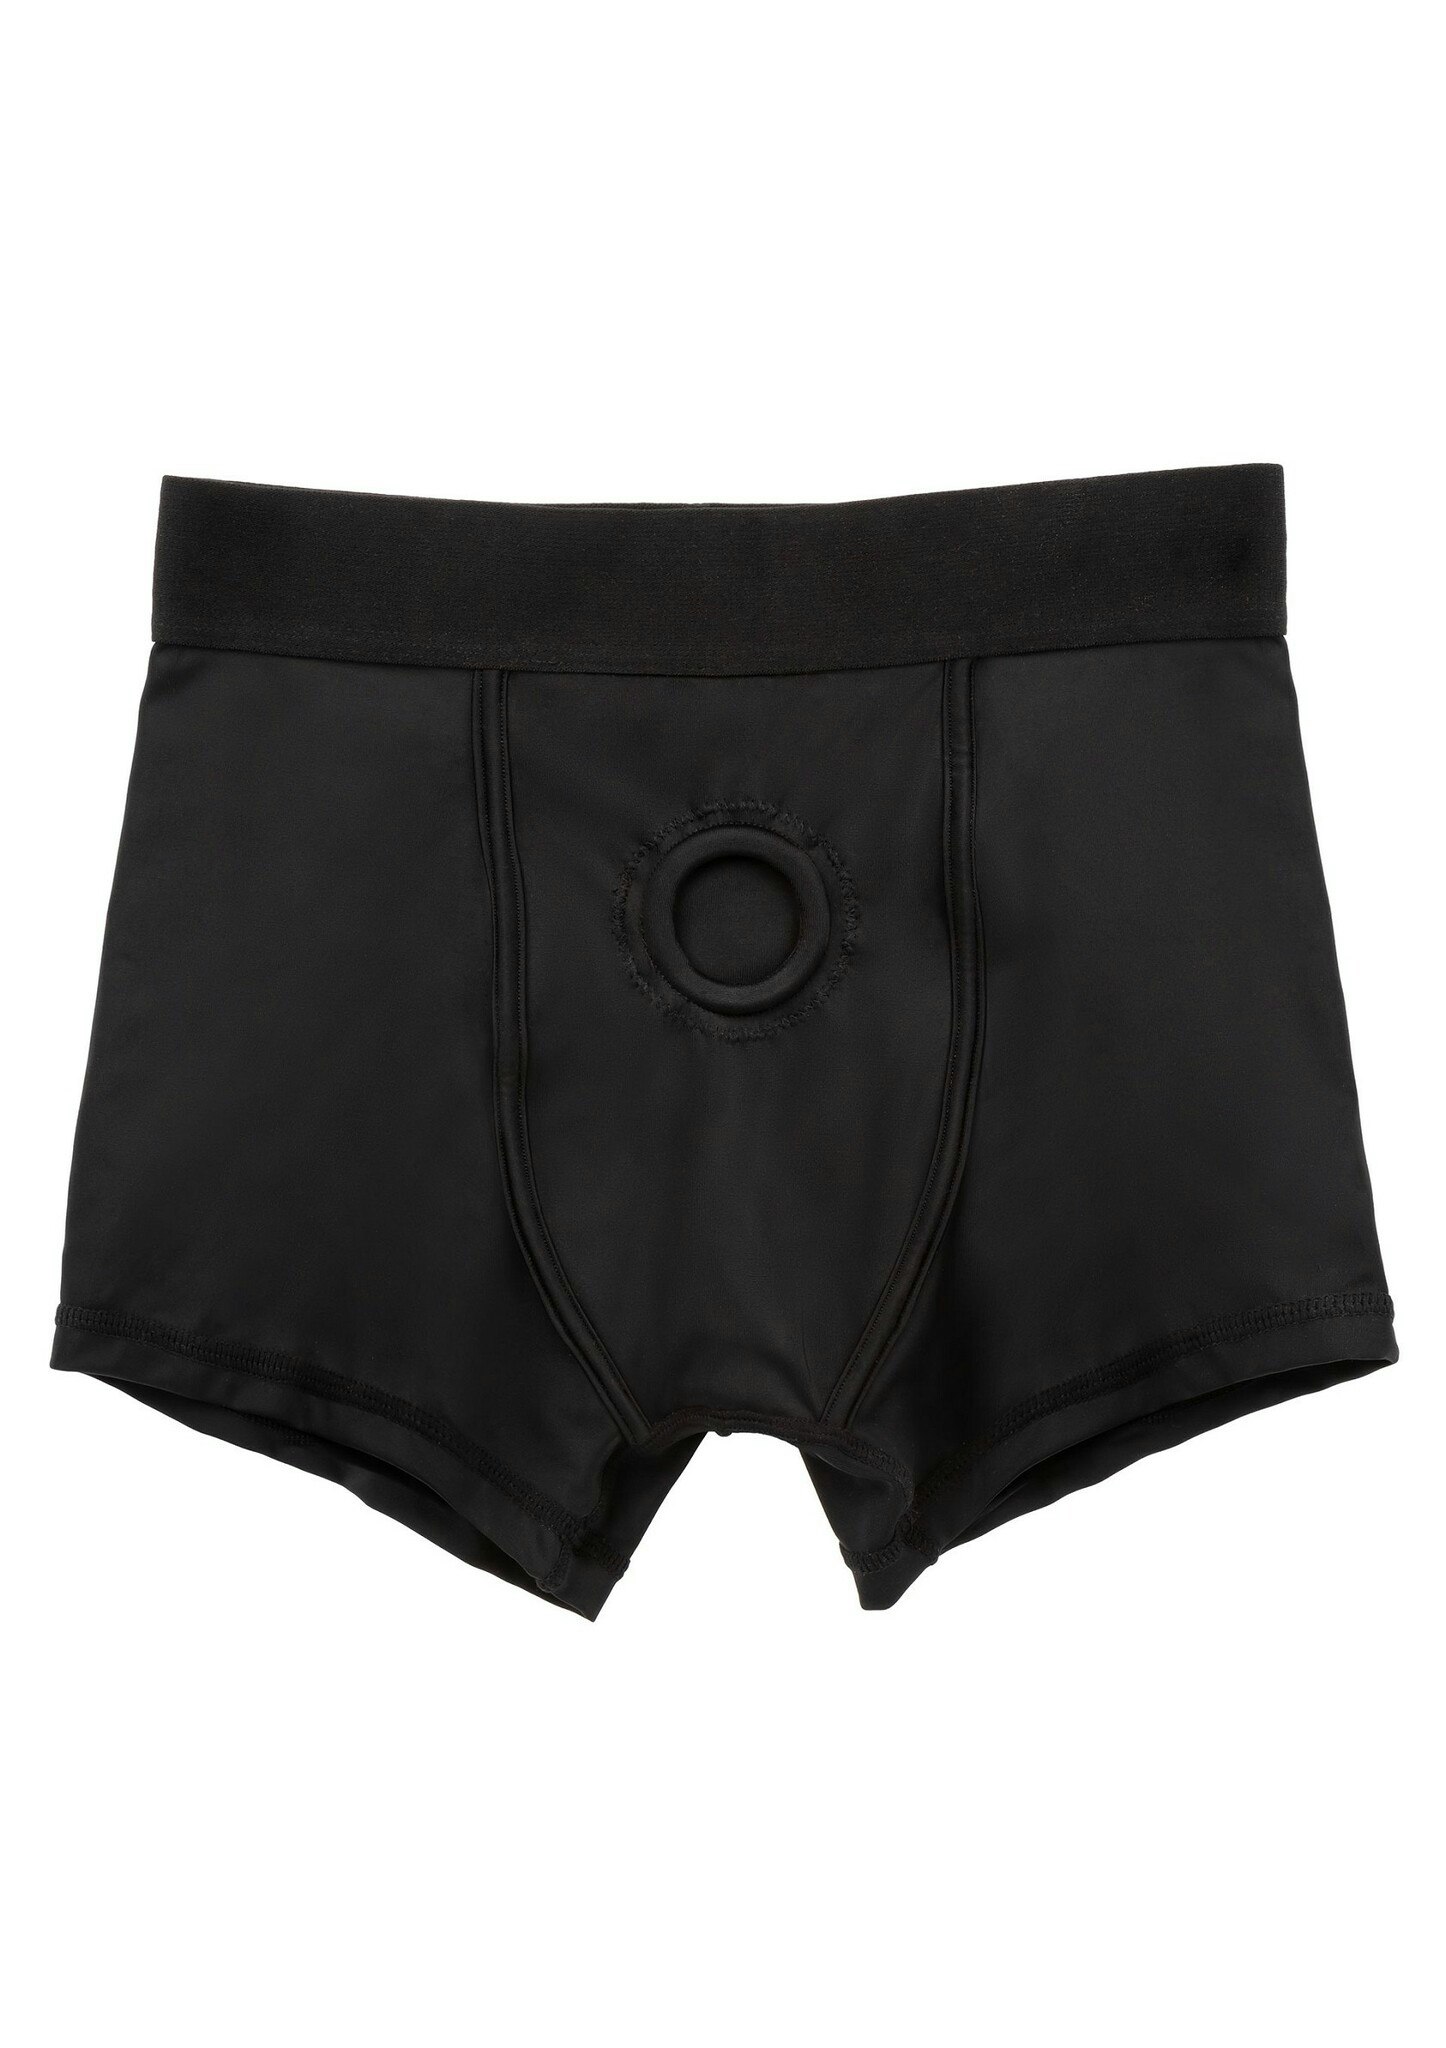 Her Royal Harness - Boxer Brief, L/XL